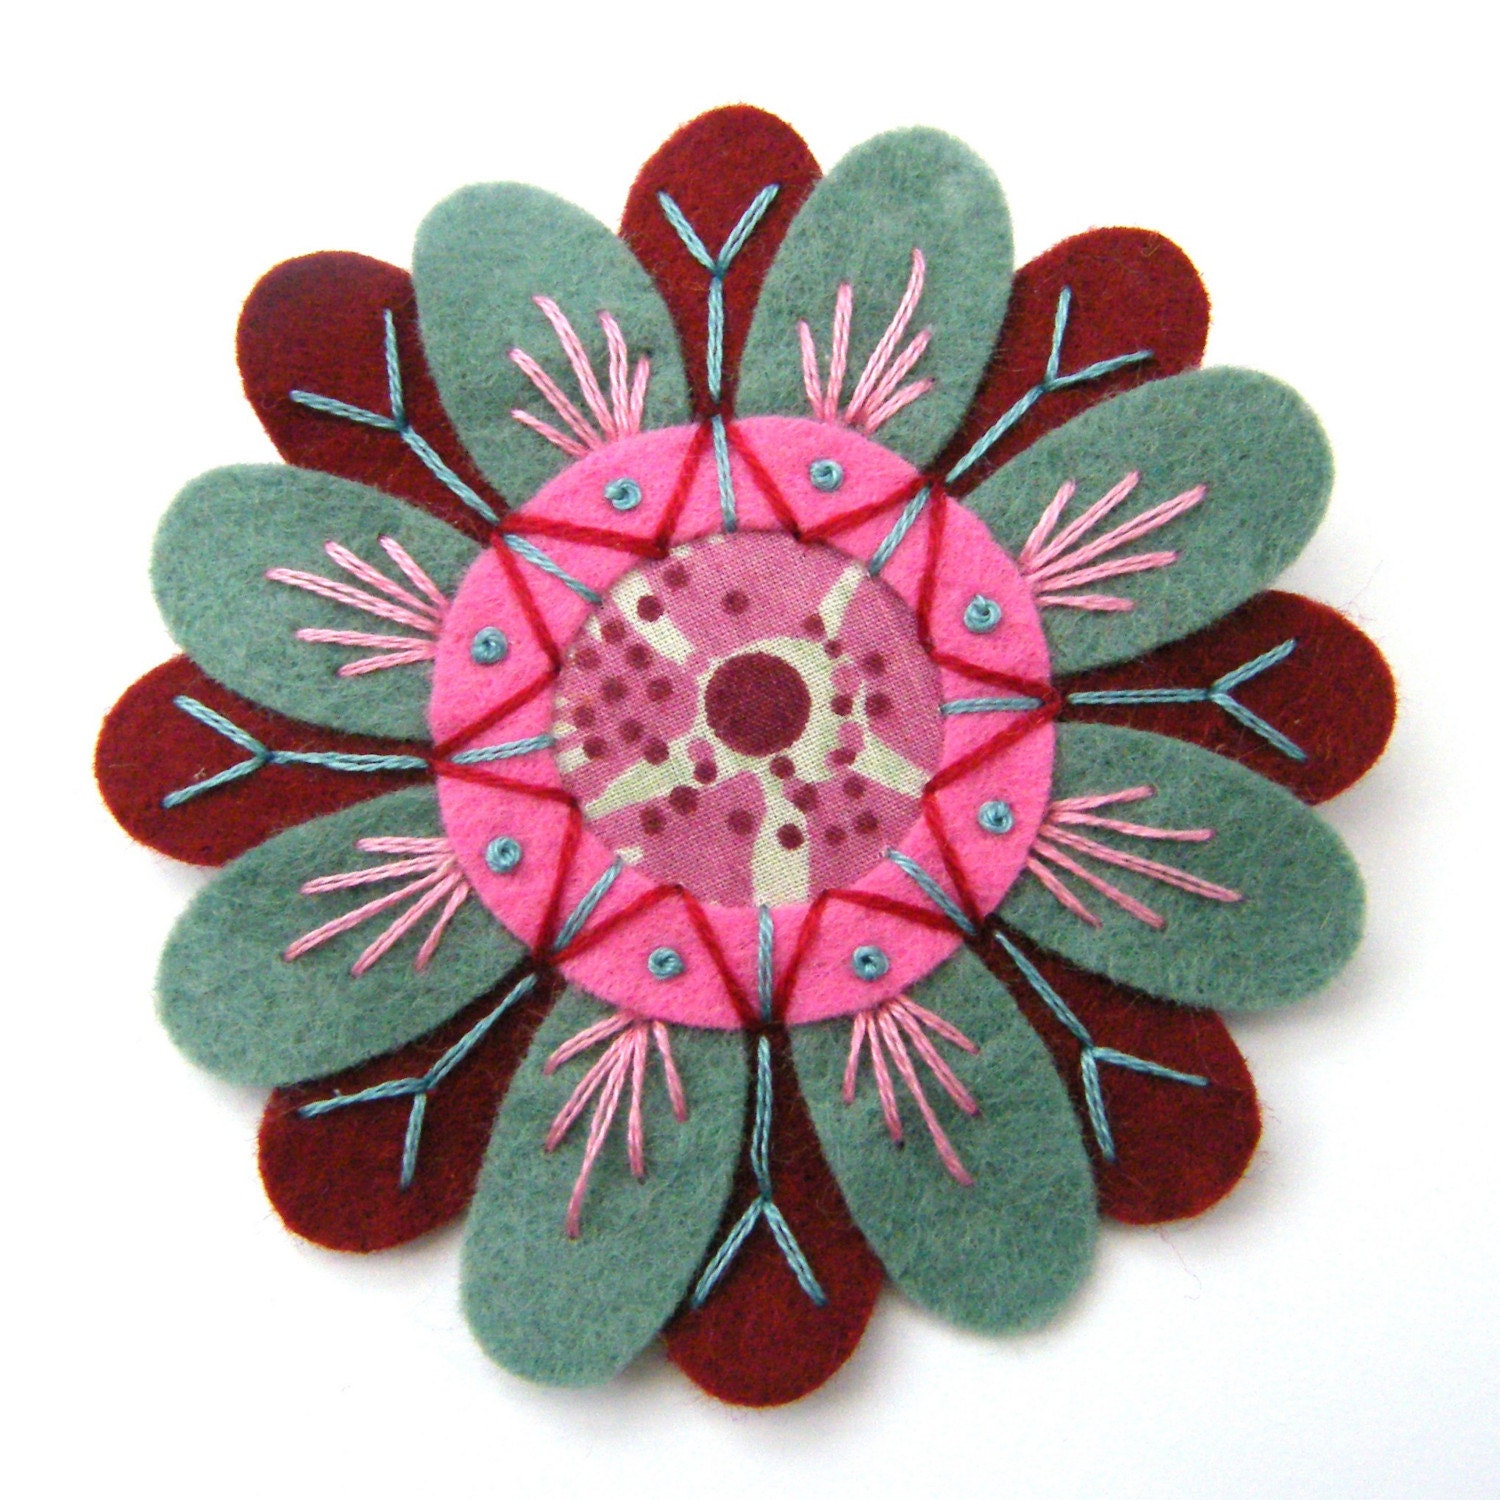 FELT AND FABRIC FLOWER BROOCH WITH FREEFORM EMBROIDERY